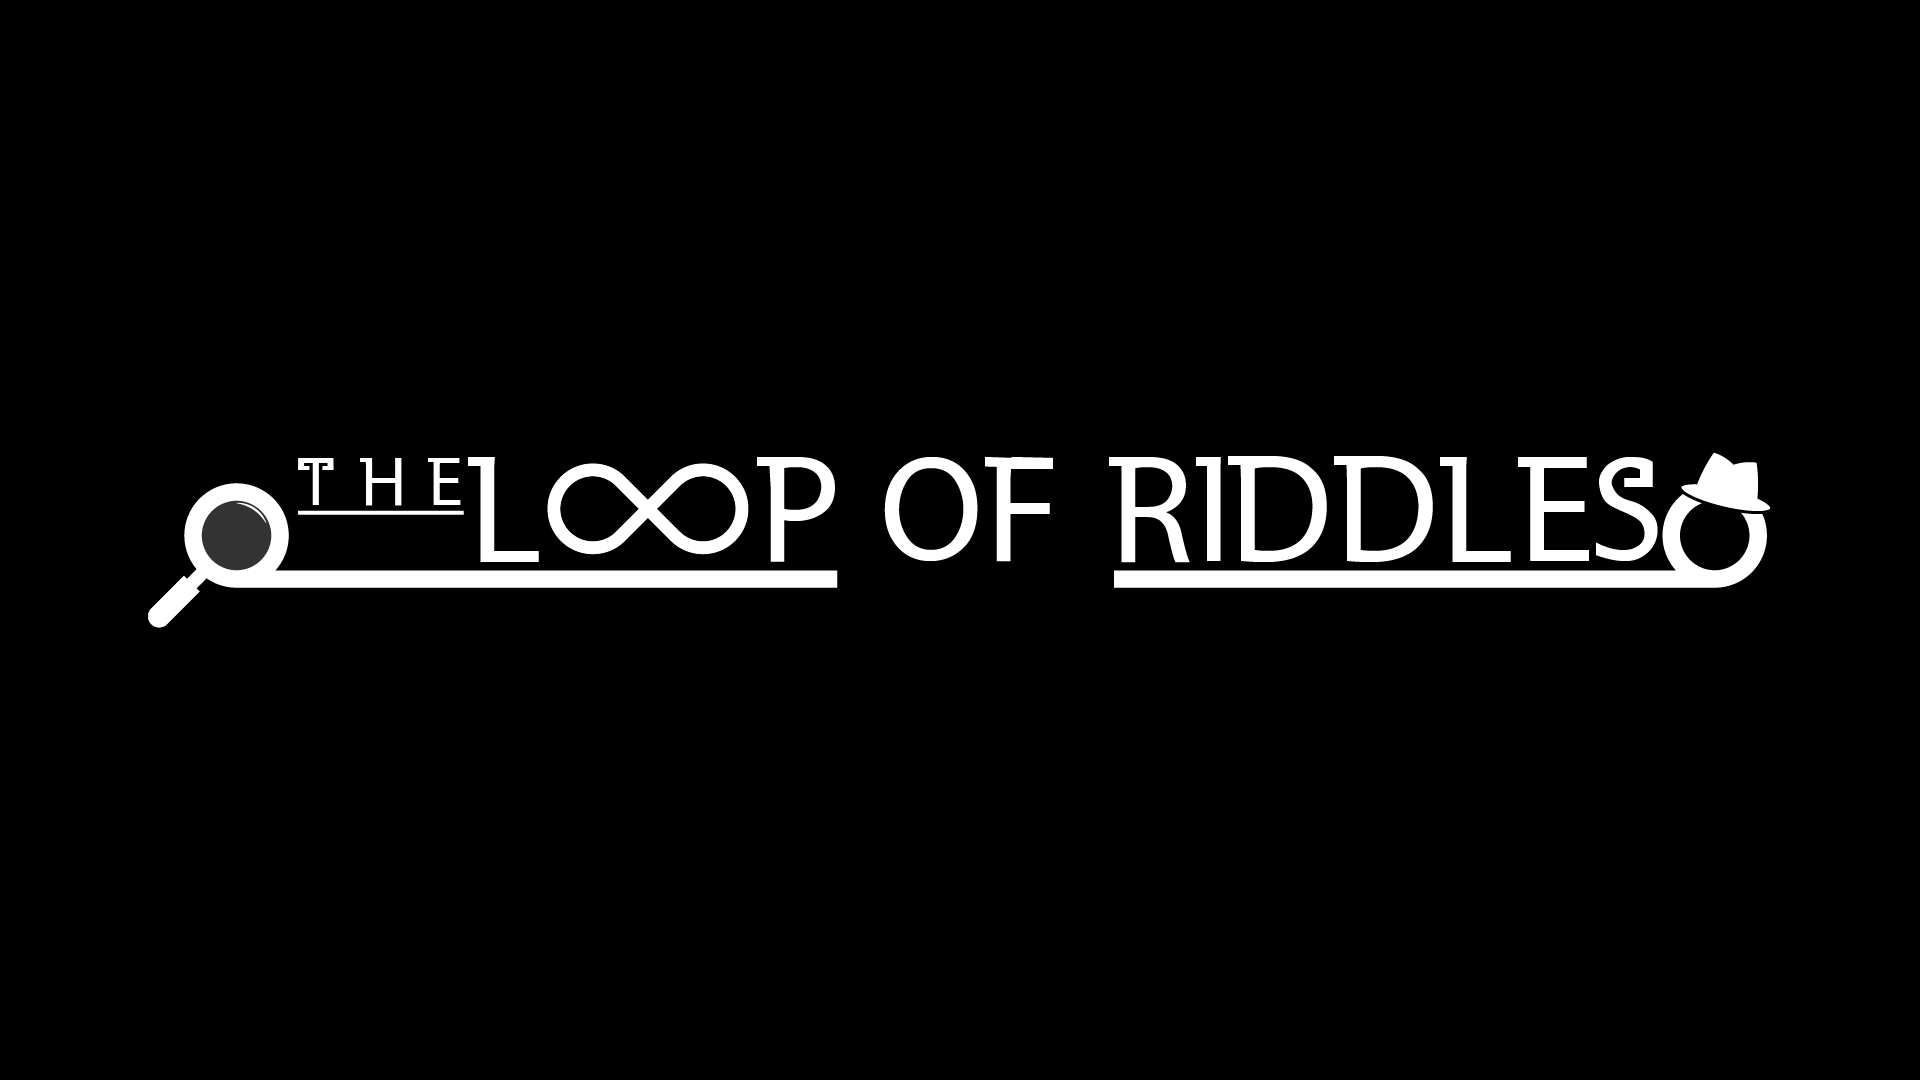 The Loop of Riddles